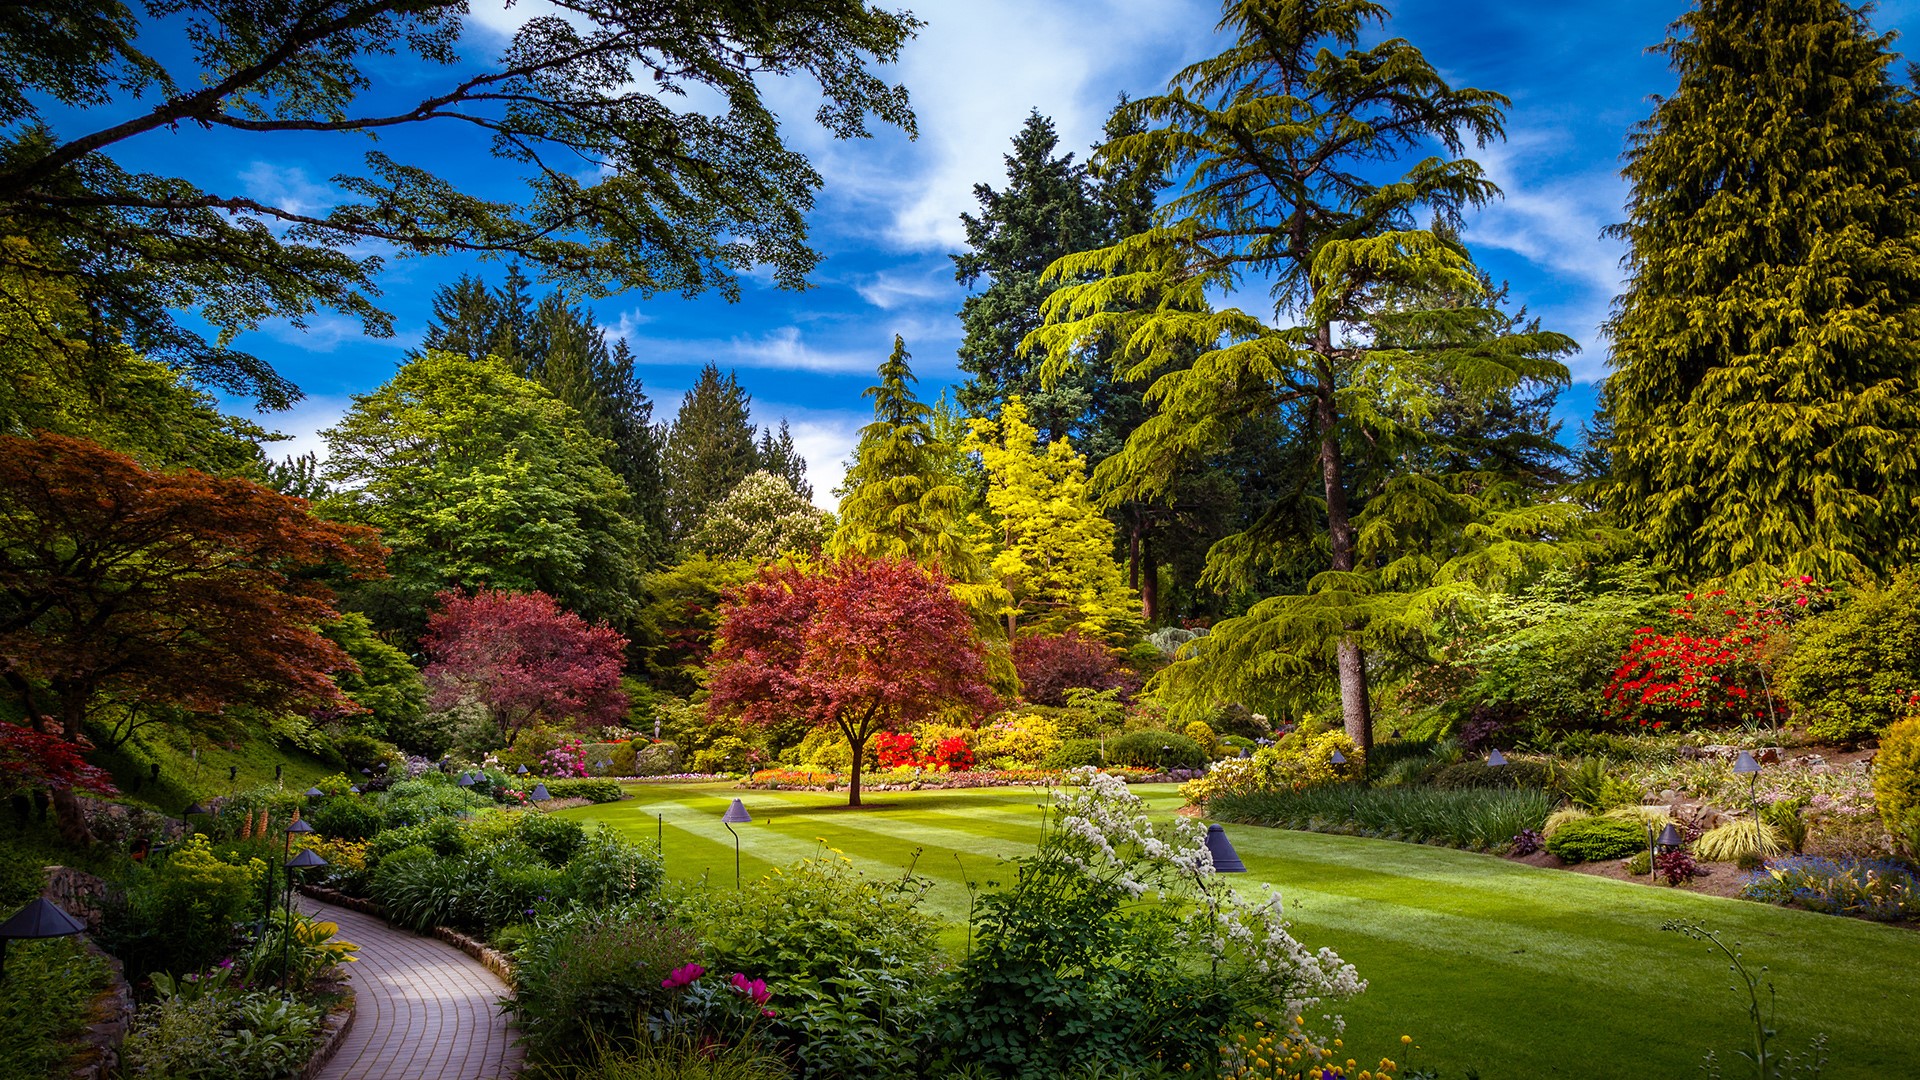 Nature Landscape Trees Plants Grass Walkway Flowers Clouds Sky The Butchart Gardens British Columbia 1920x1080